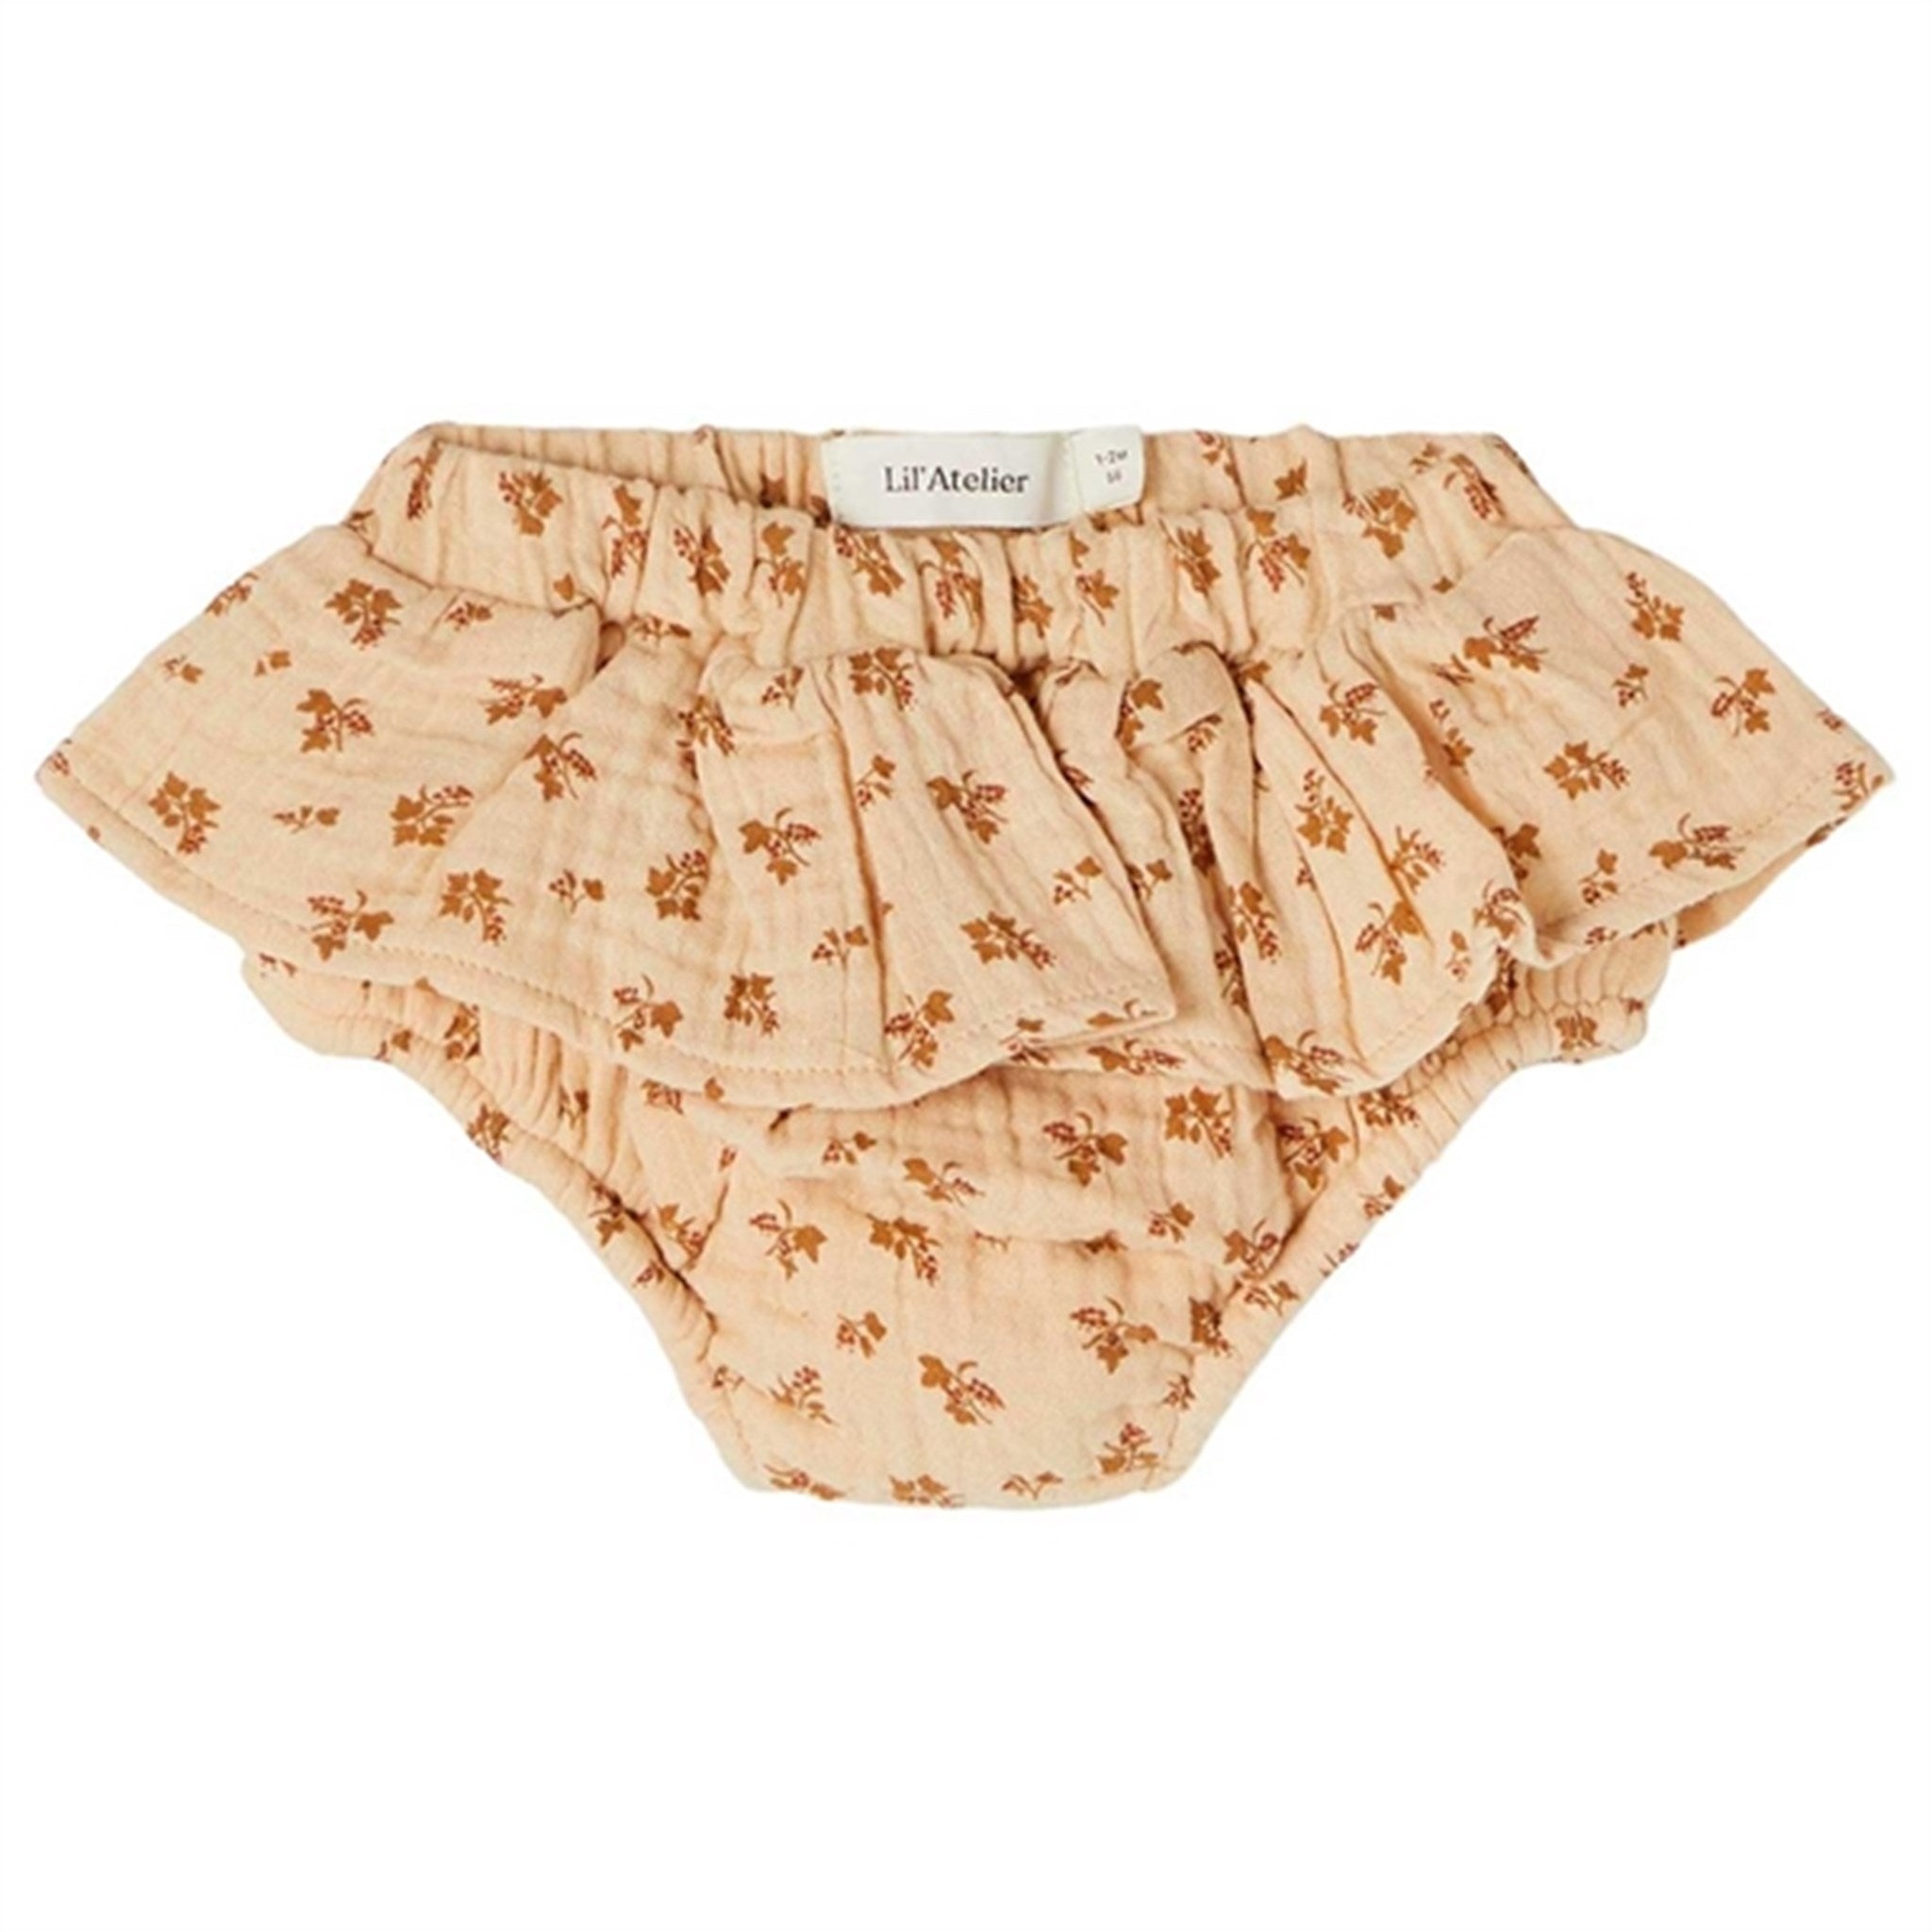 Lil'Atelier Croissant Dolo Beach Bloomers